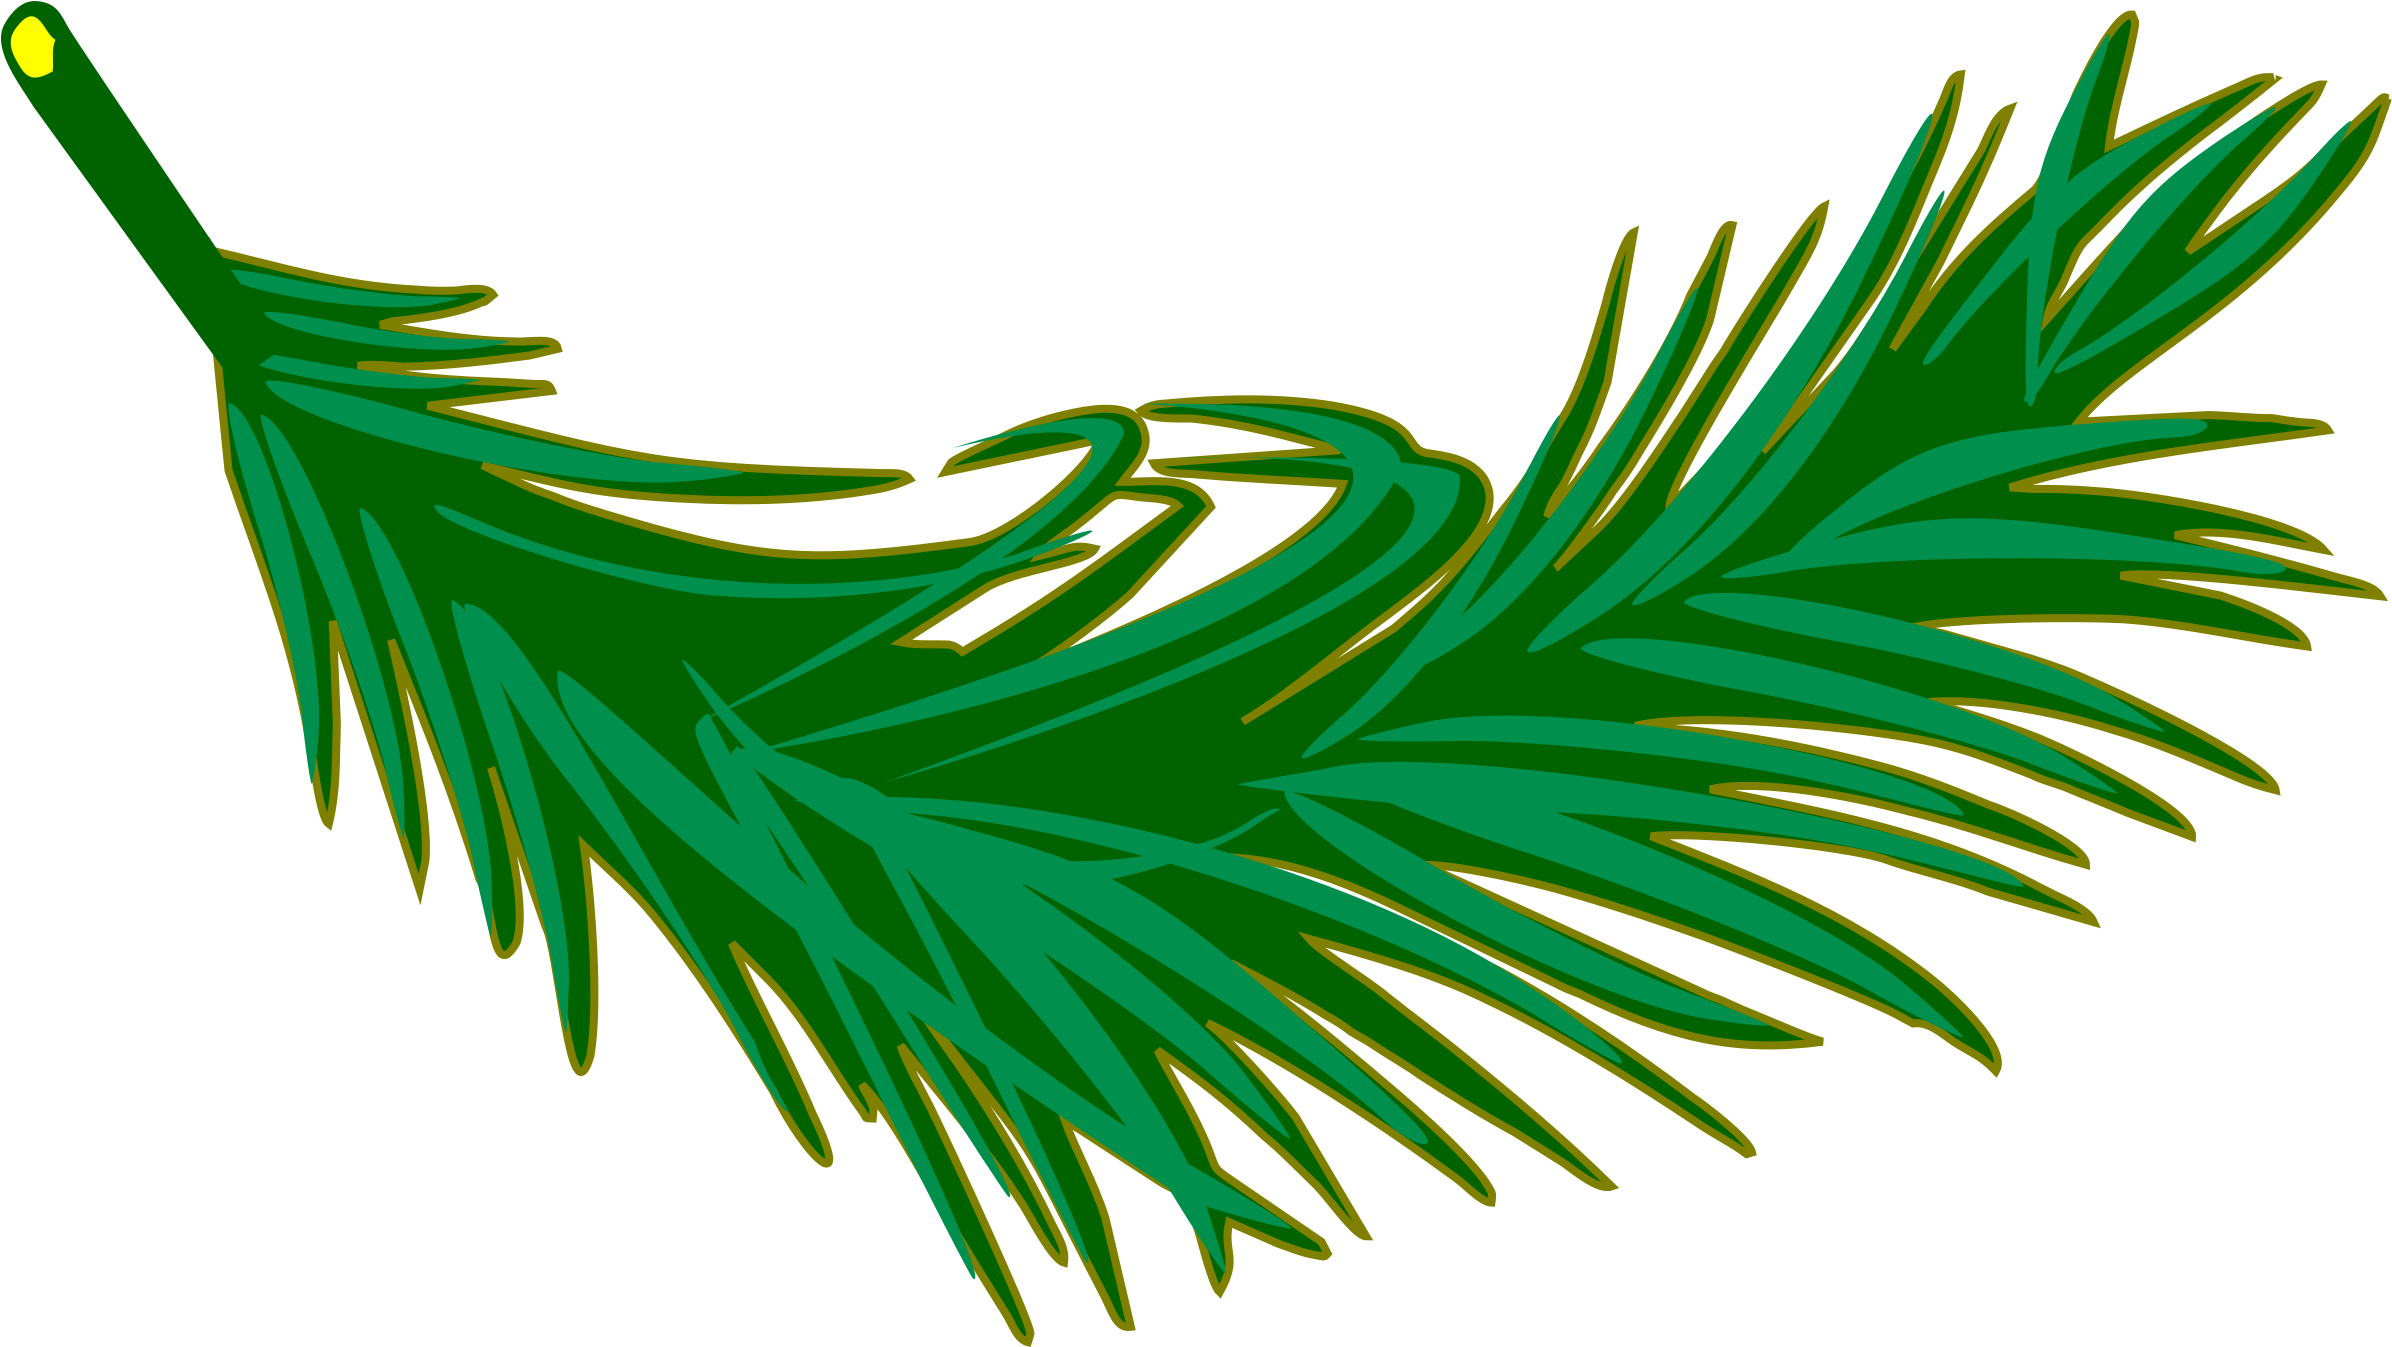 A Green And Yellow Drawing Of A Bird